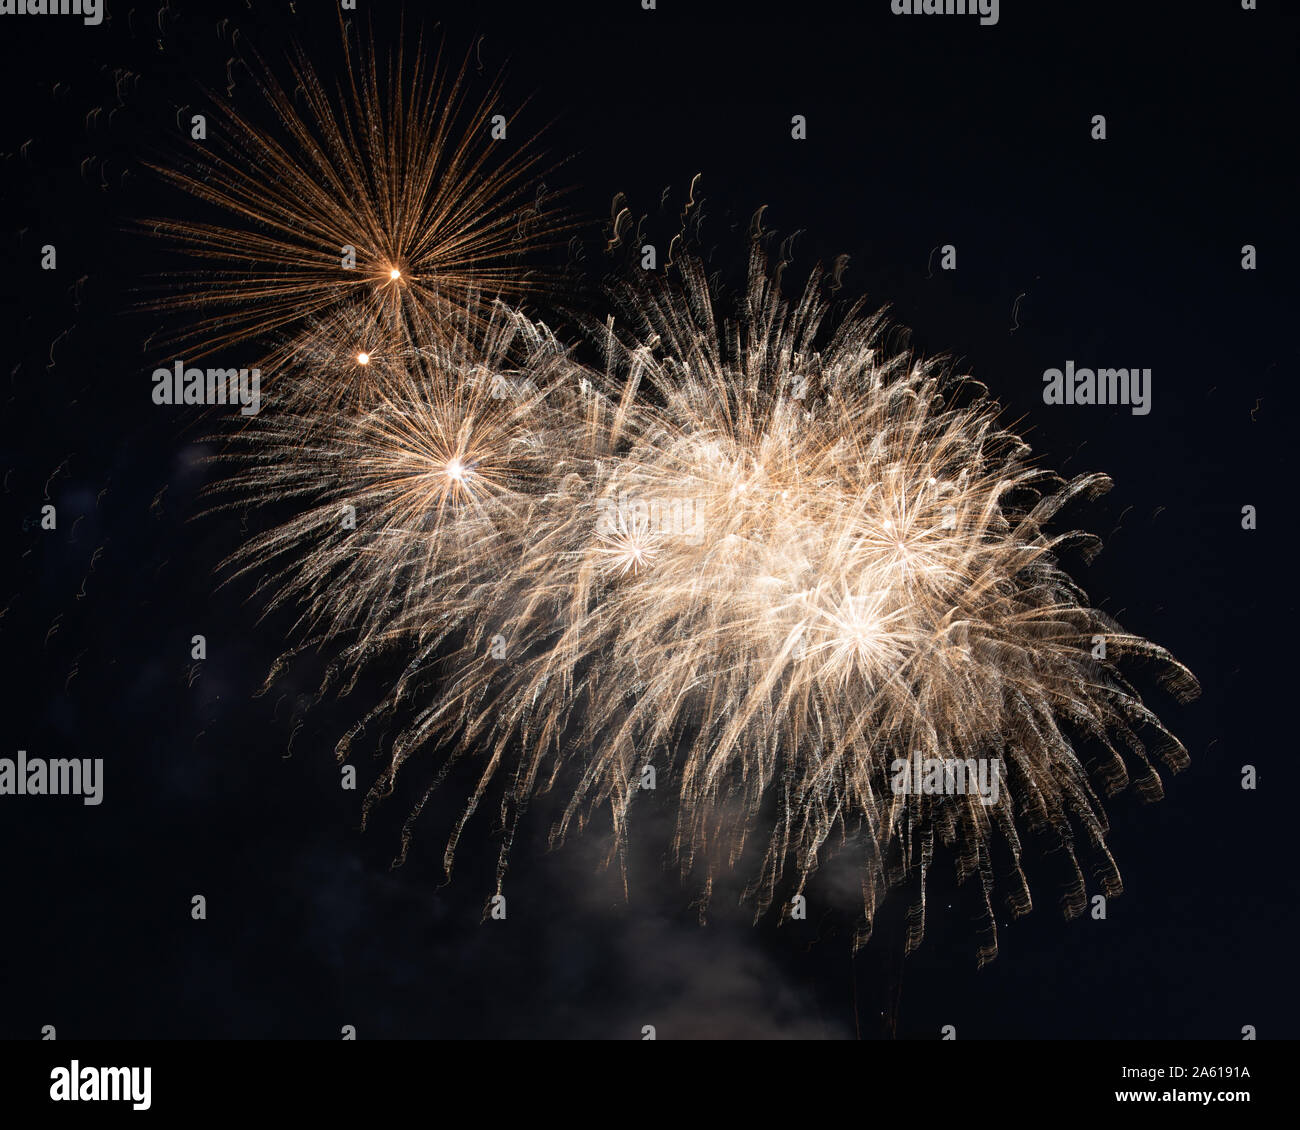 Fireworks photographed in the night sky with a long exposure and black background high quality image good for pc backgrounds and fine art prints. Stock Photo